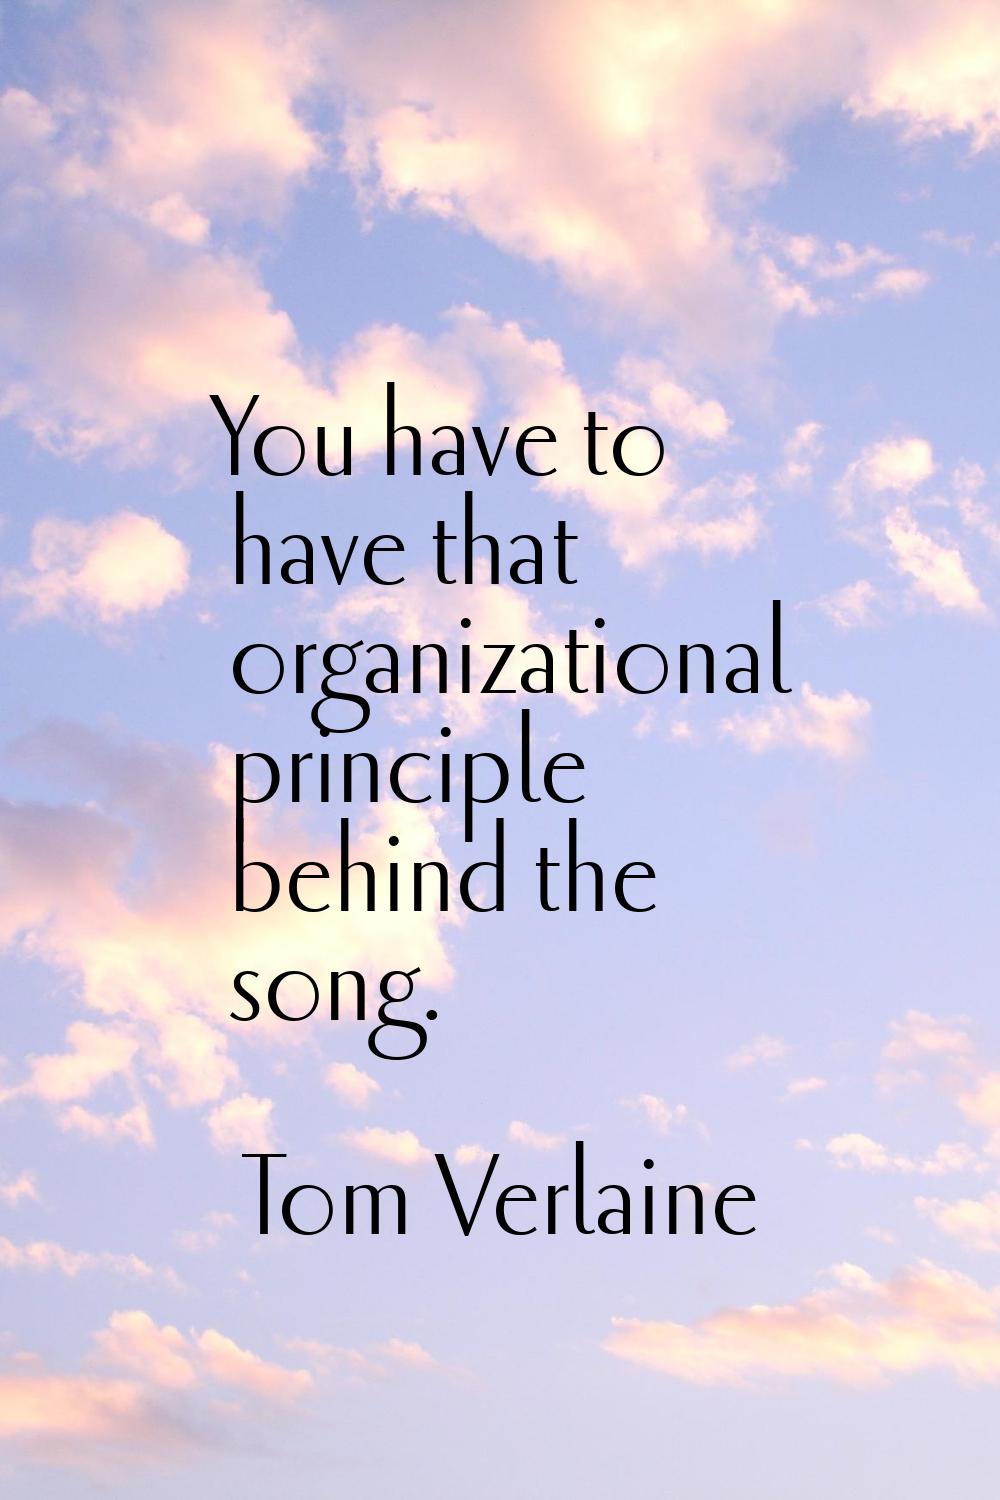 You have to have that organizational principle behind the song.